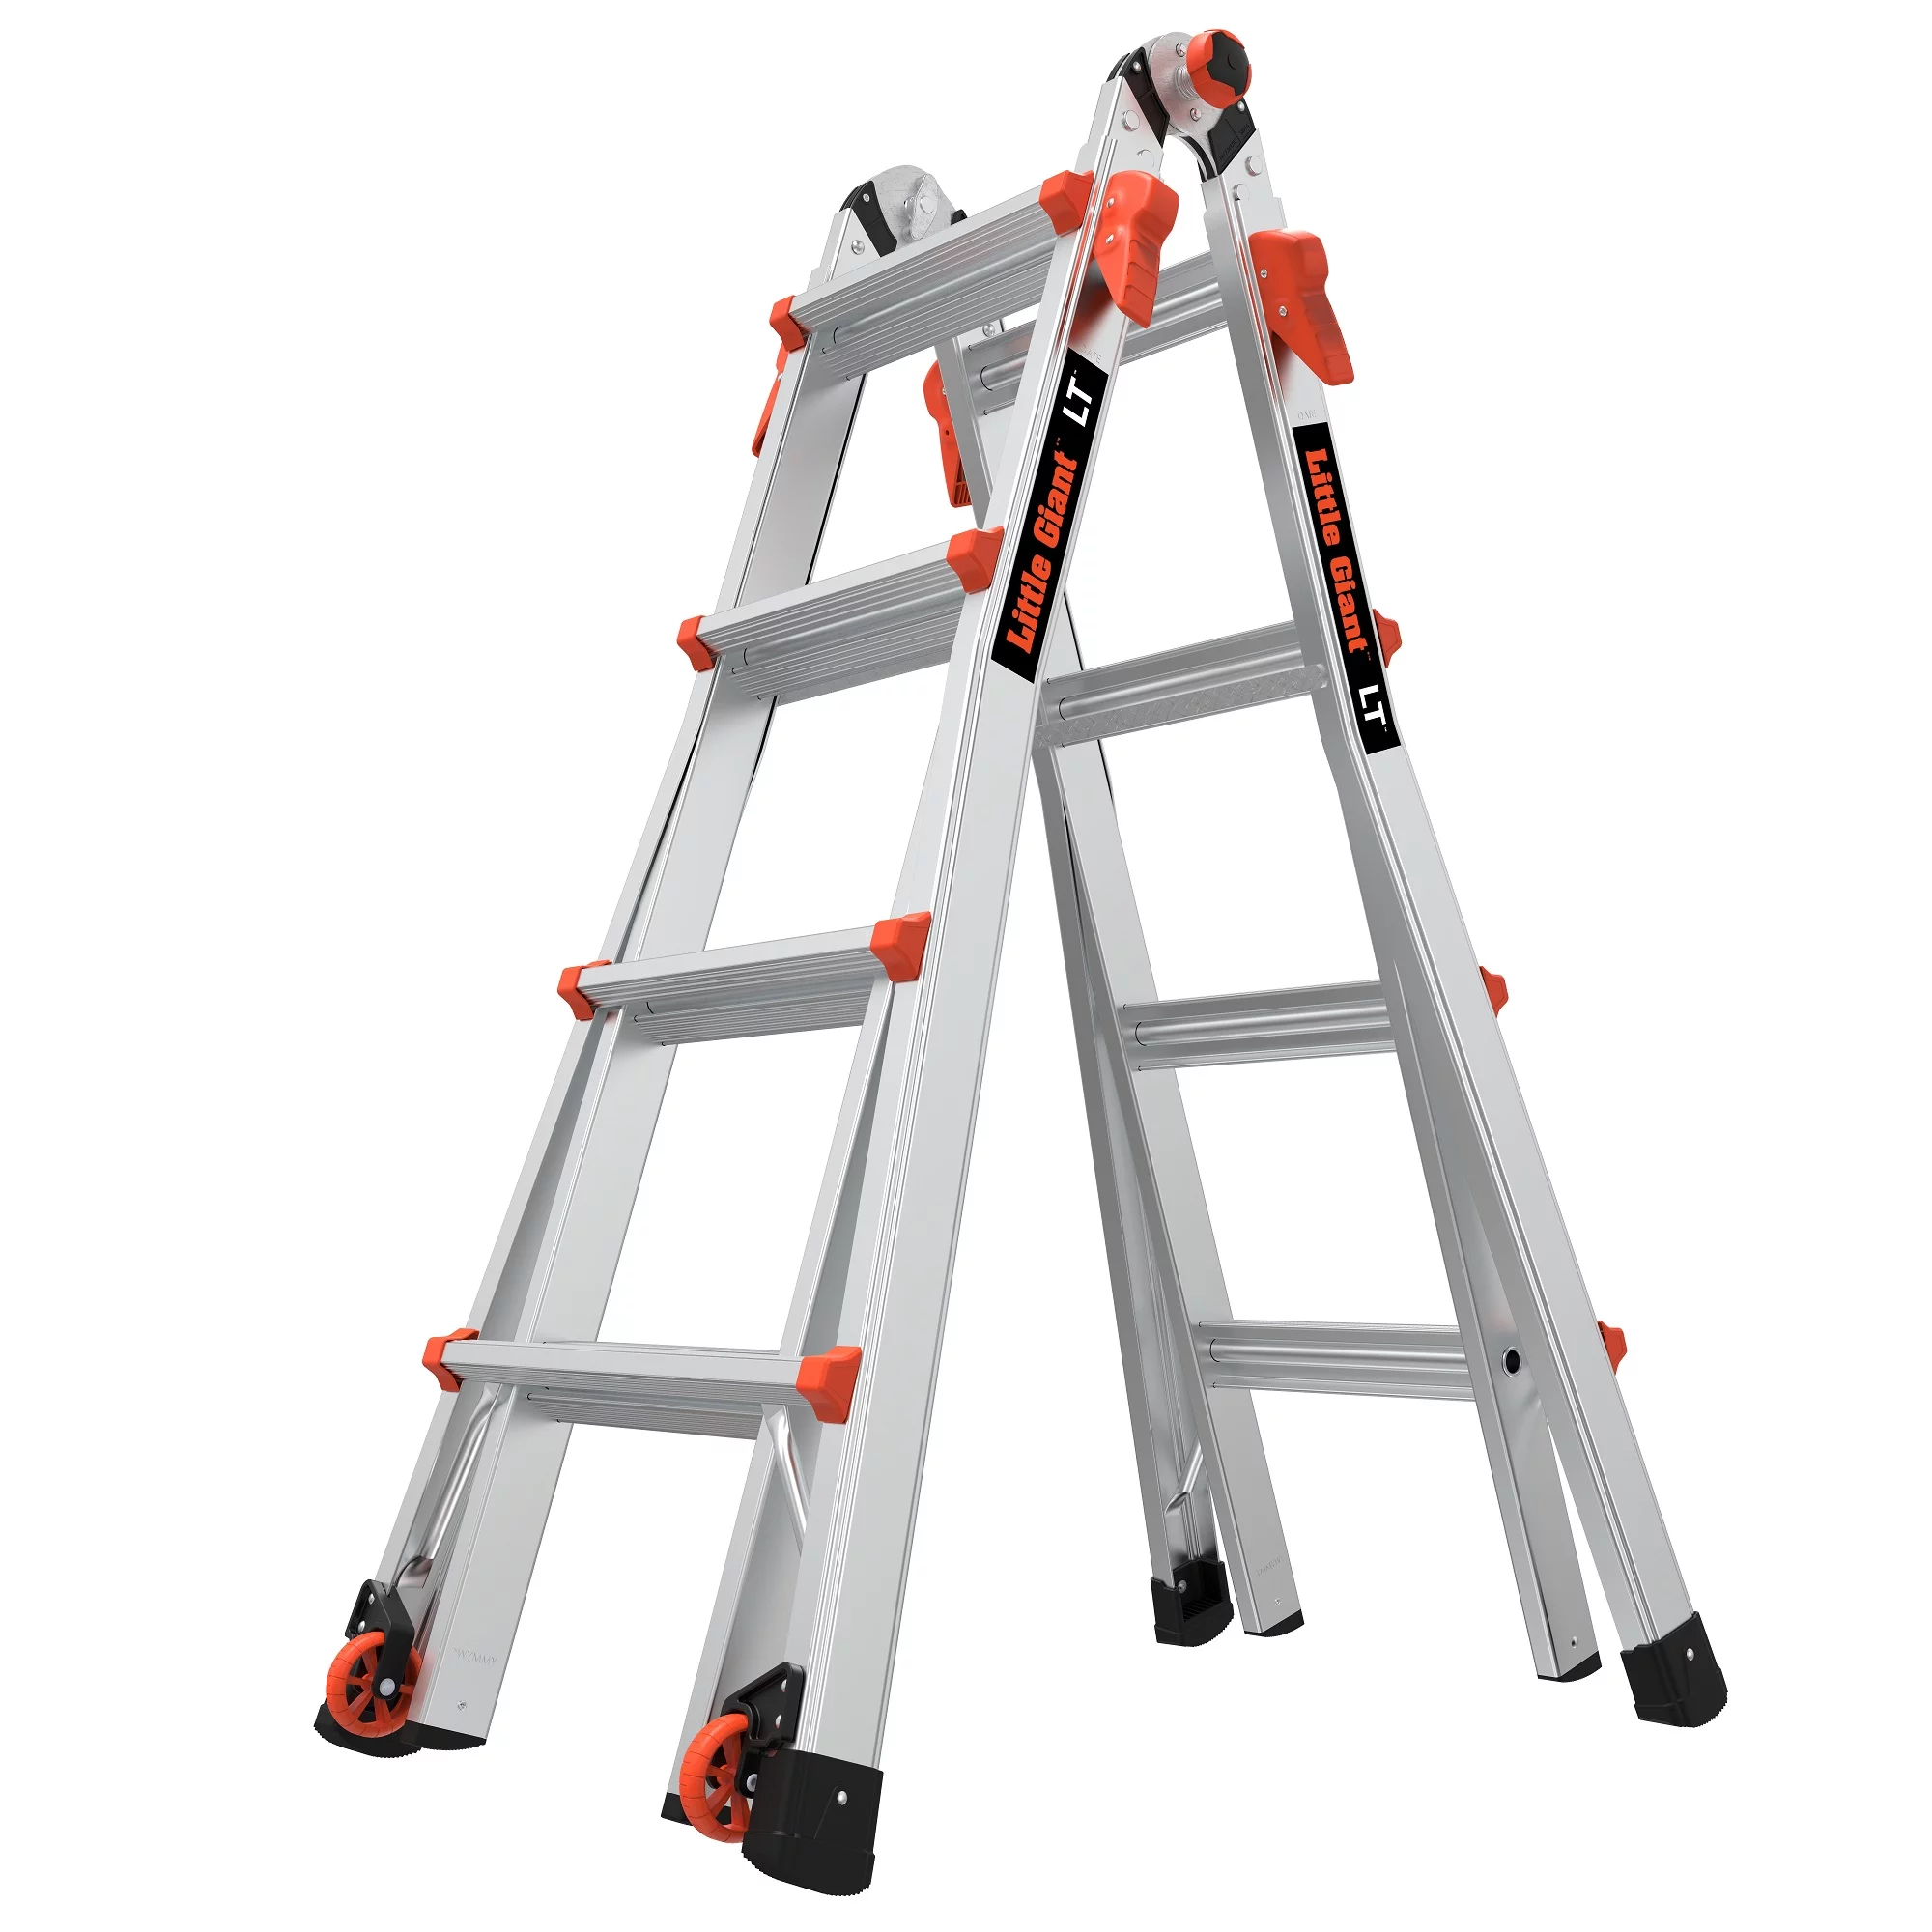 Little Giant LT M17 Aluminum Multi-Use Ladder with Wheels, Type 1A - 300 lbs. Rated